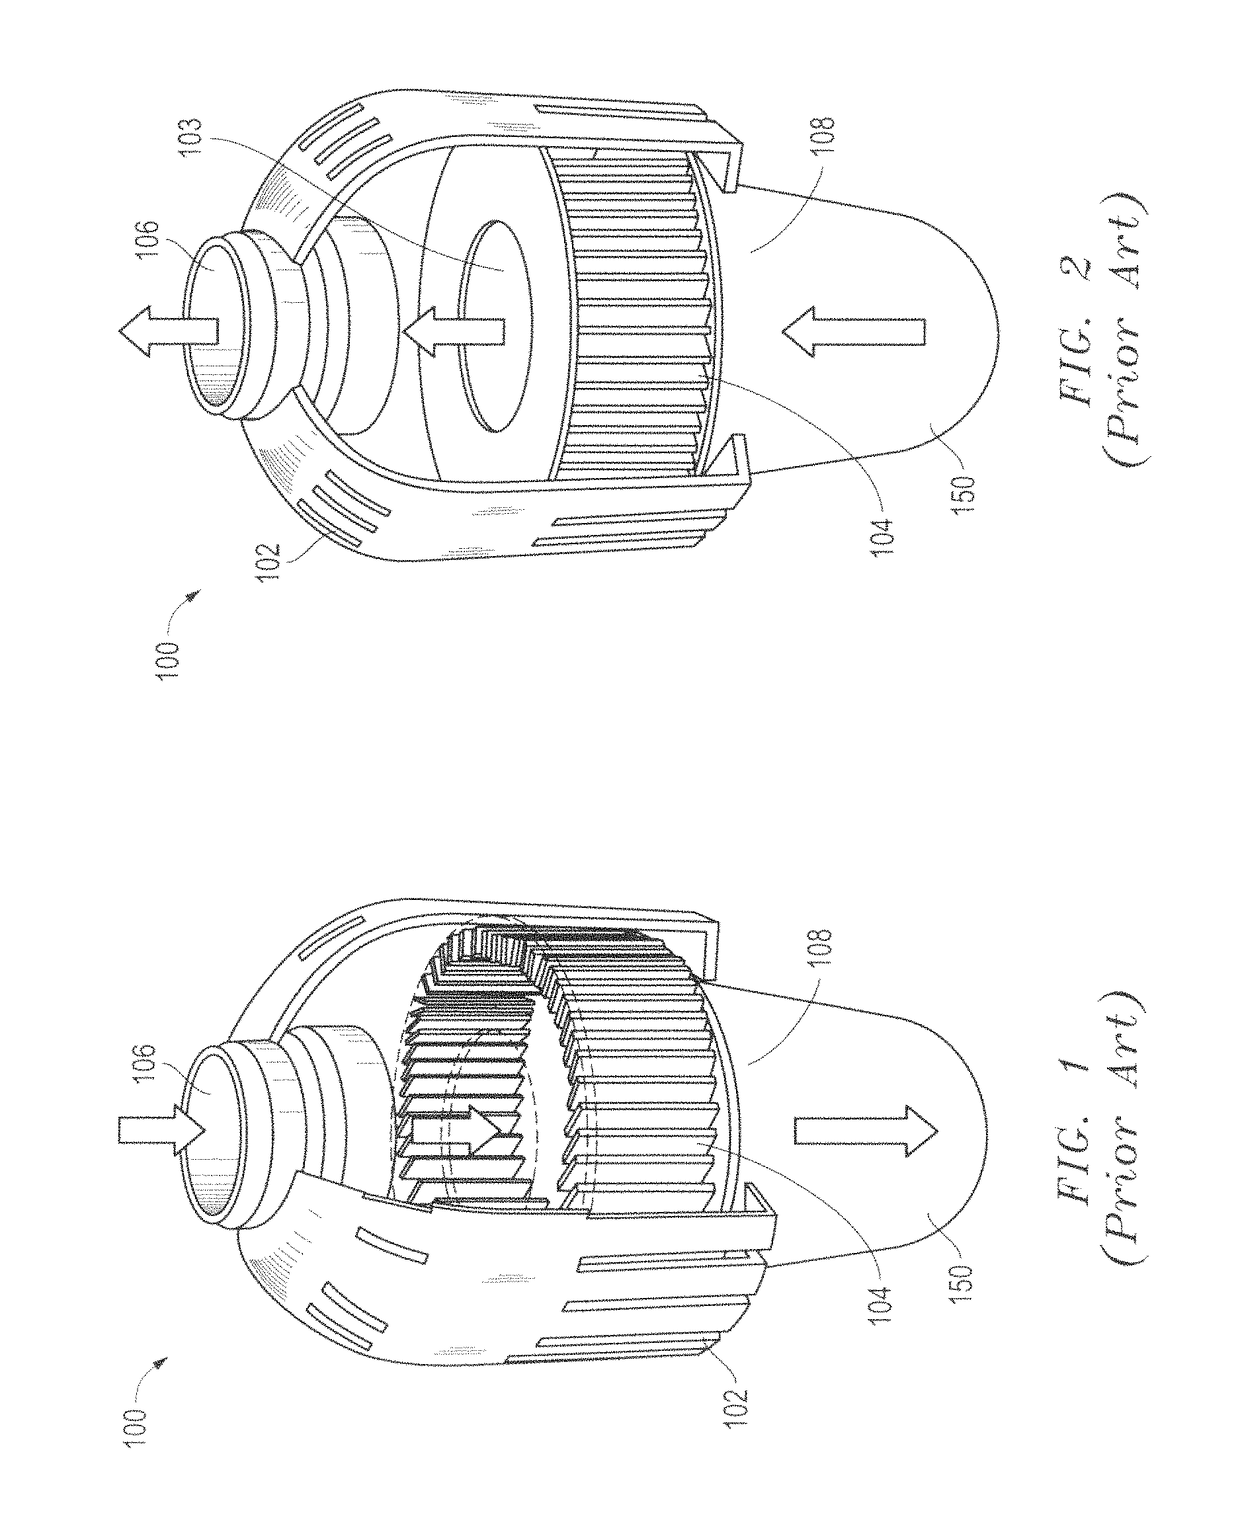 Dual operation centrifugal fan apparatus and methods of using same